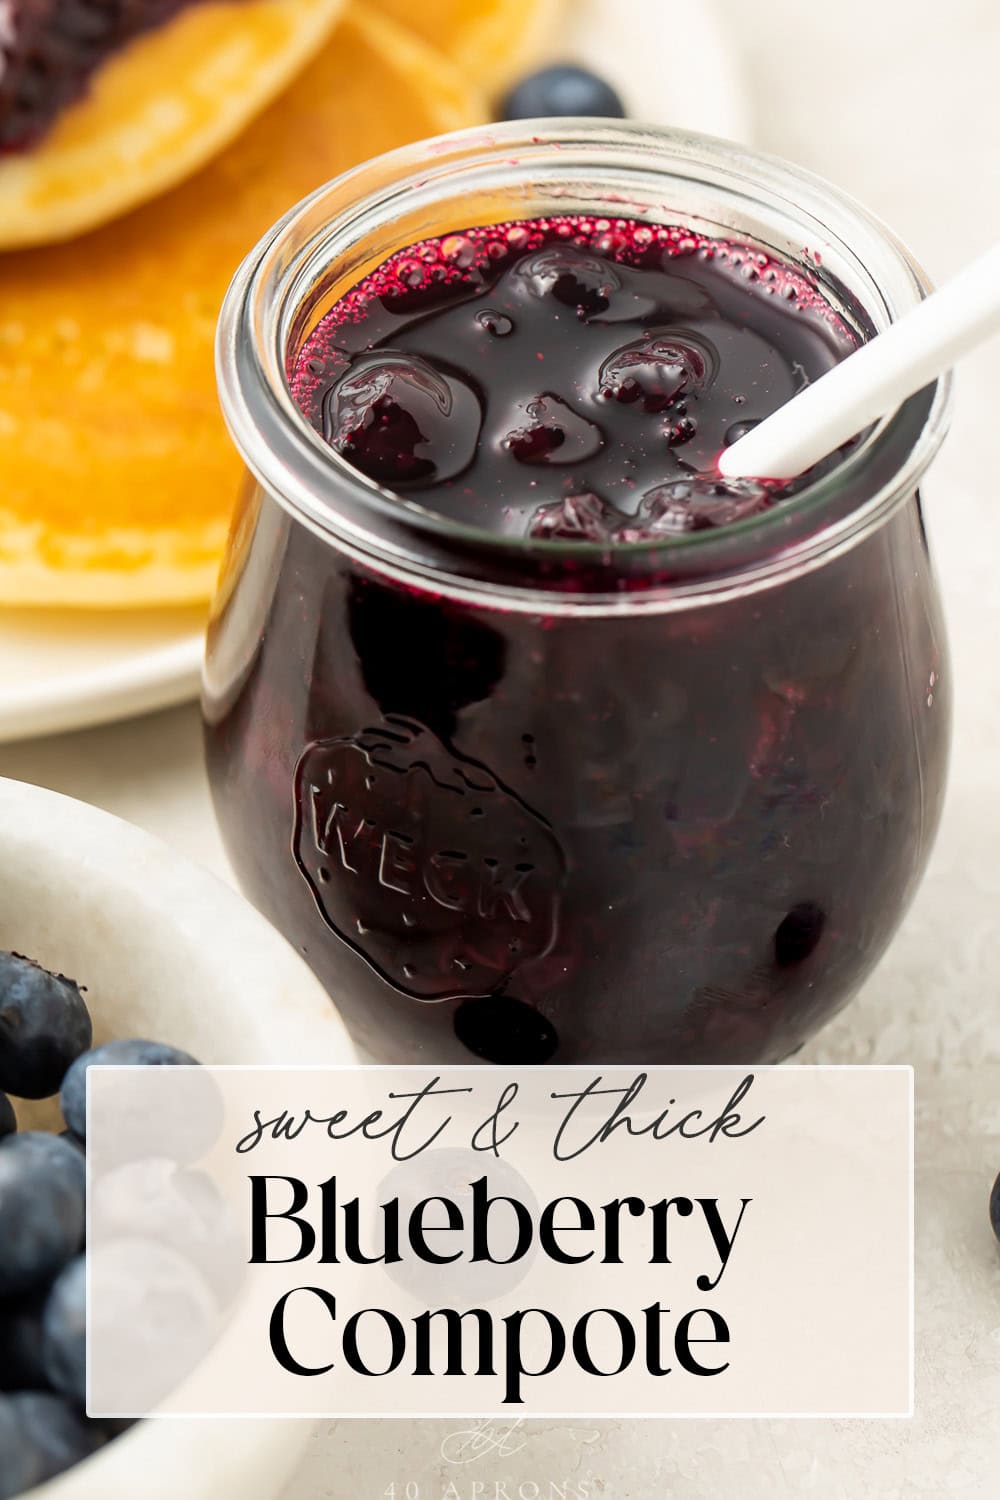 Pin graphic for blueberry compote.